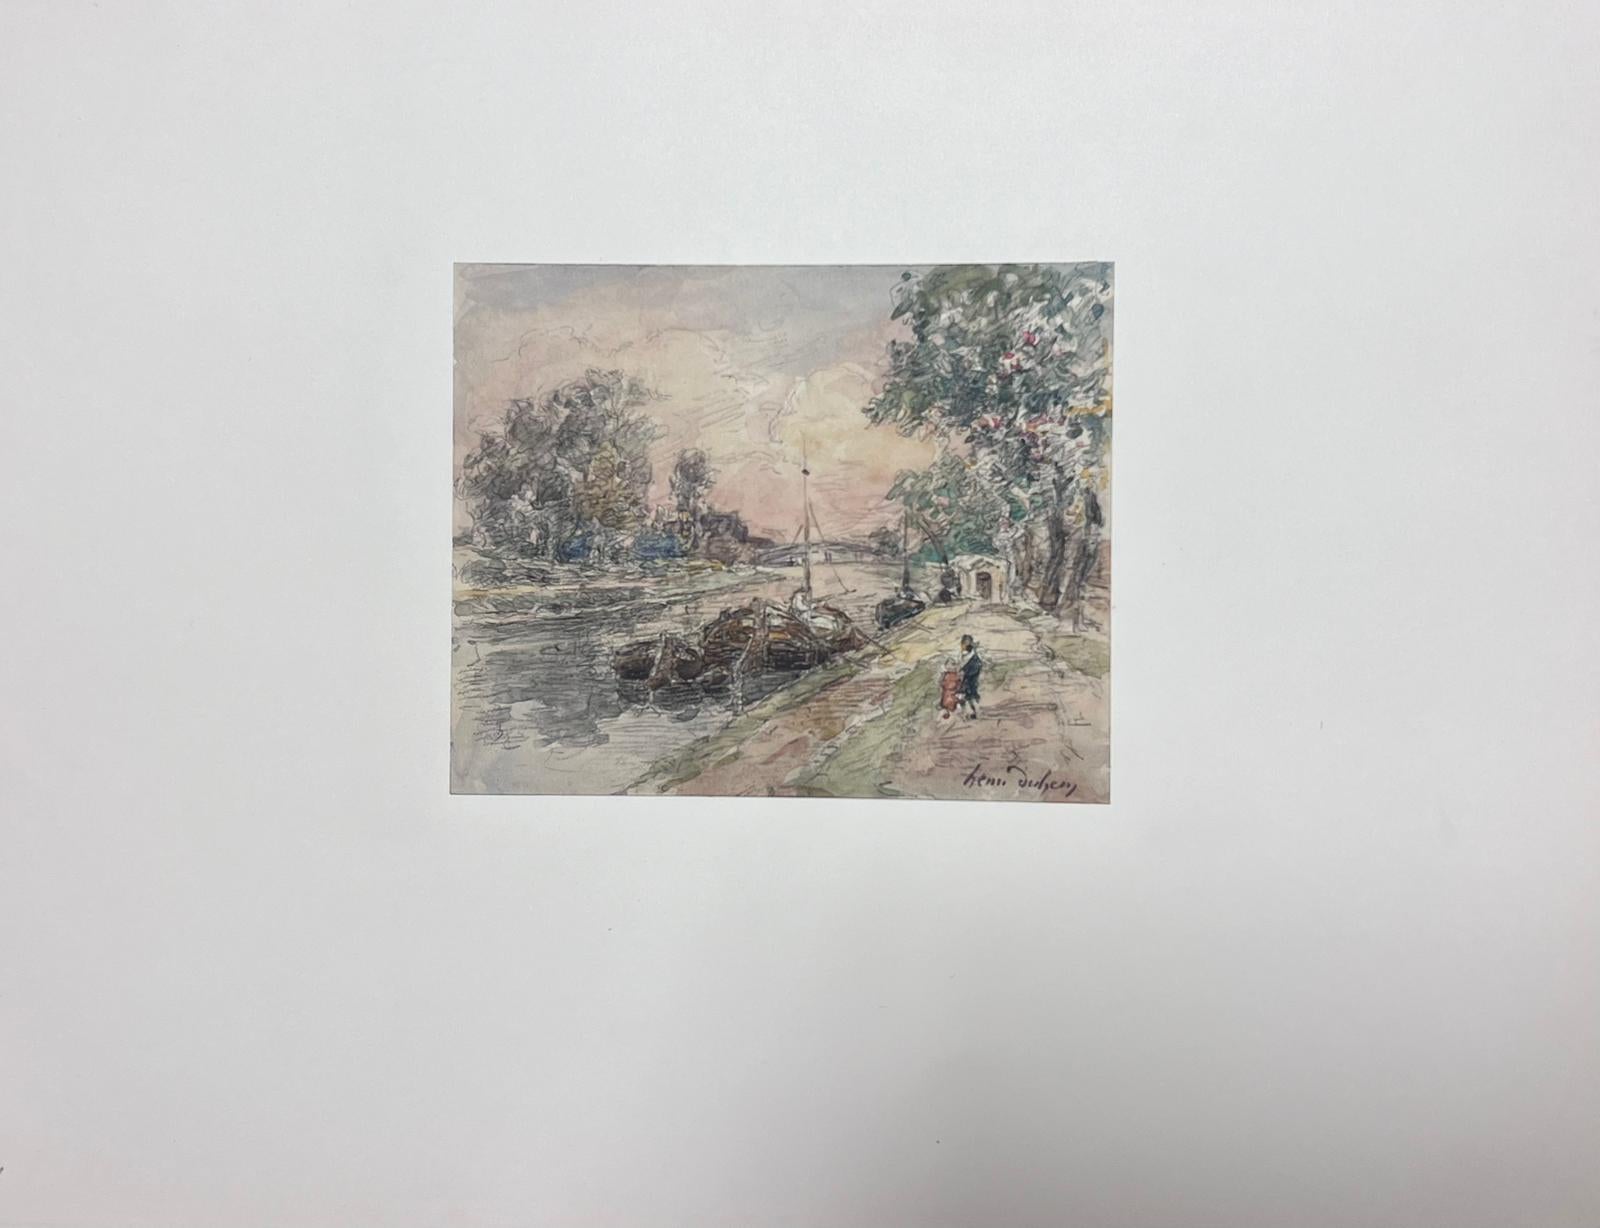 The artist: 
Henri Aime Duhem (1860-1941) French *see notes below, signed 

Title: The Canal

Medium:  
gouache on paper, loosely laid over card, unframed

card: 9.75 x 13 inches
painting: 4.25 x 5 inches

Provenance: 
private collection of this